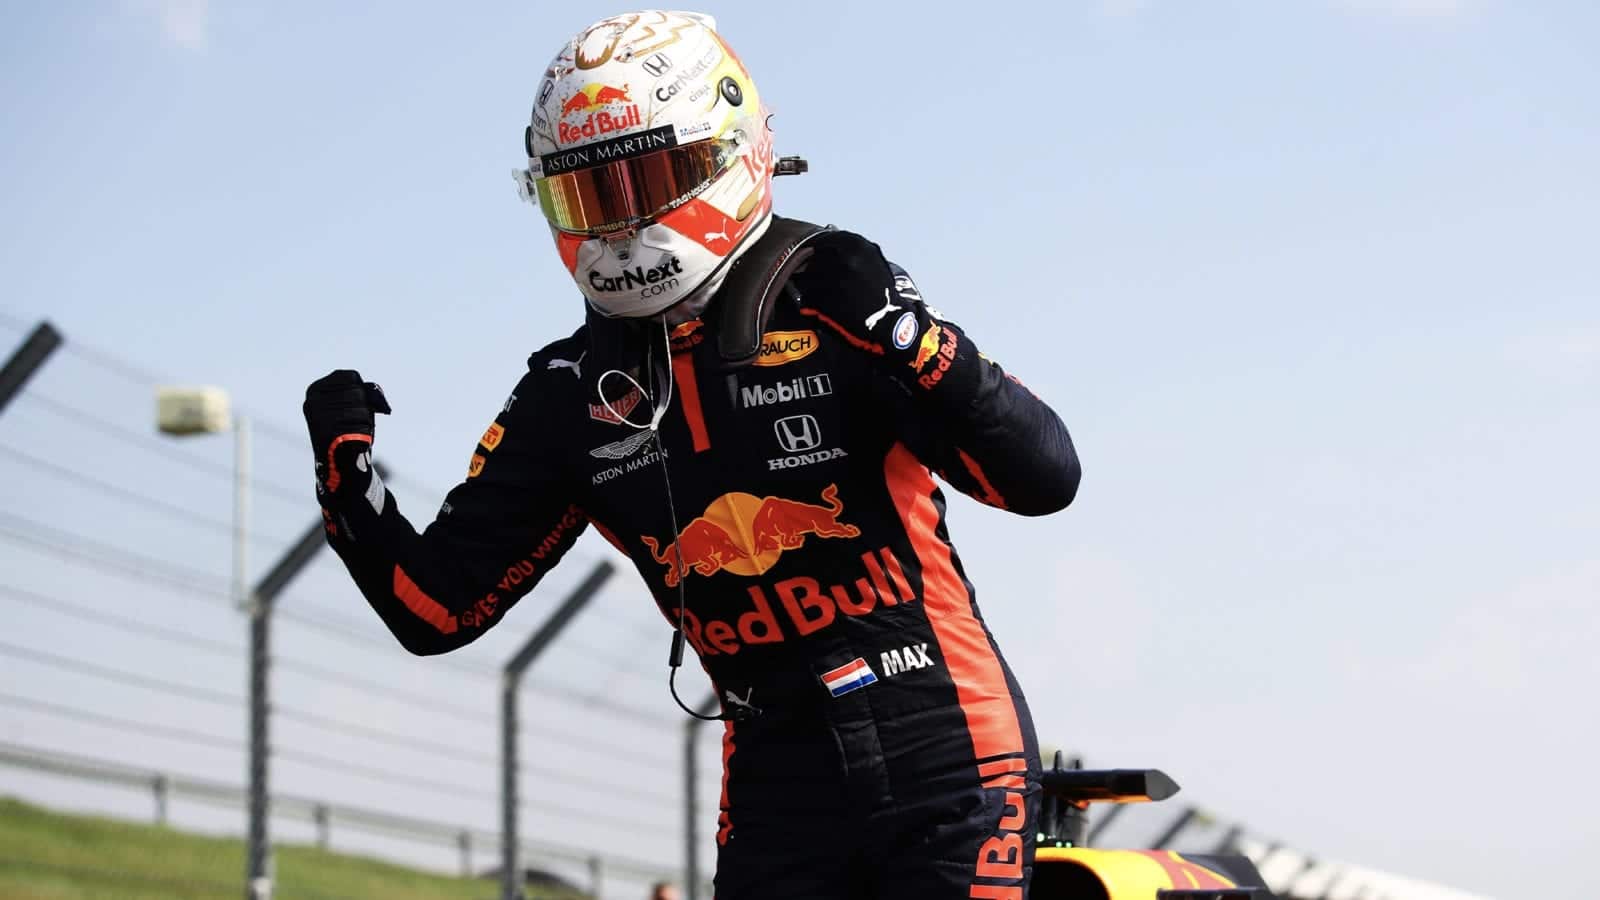 Max Verstappen celebrates after winning the 2020 f1 70th Anniversary Grand Prix for Red Bull at Silverstone